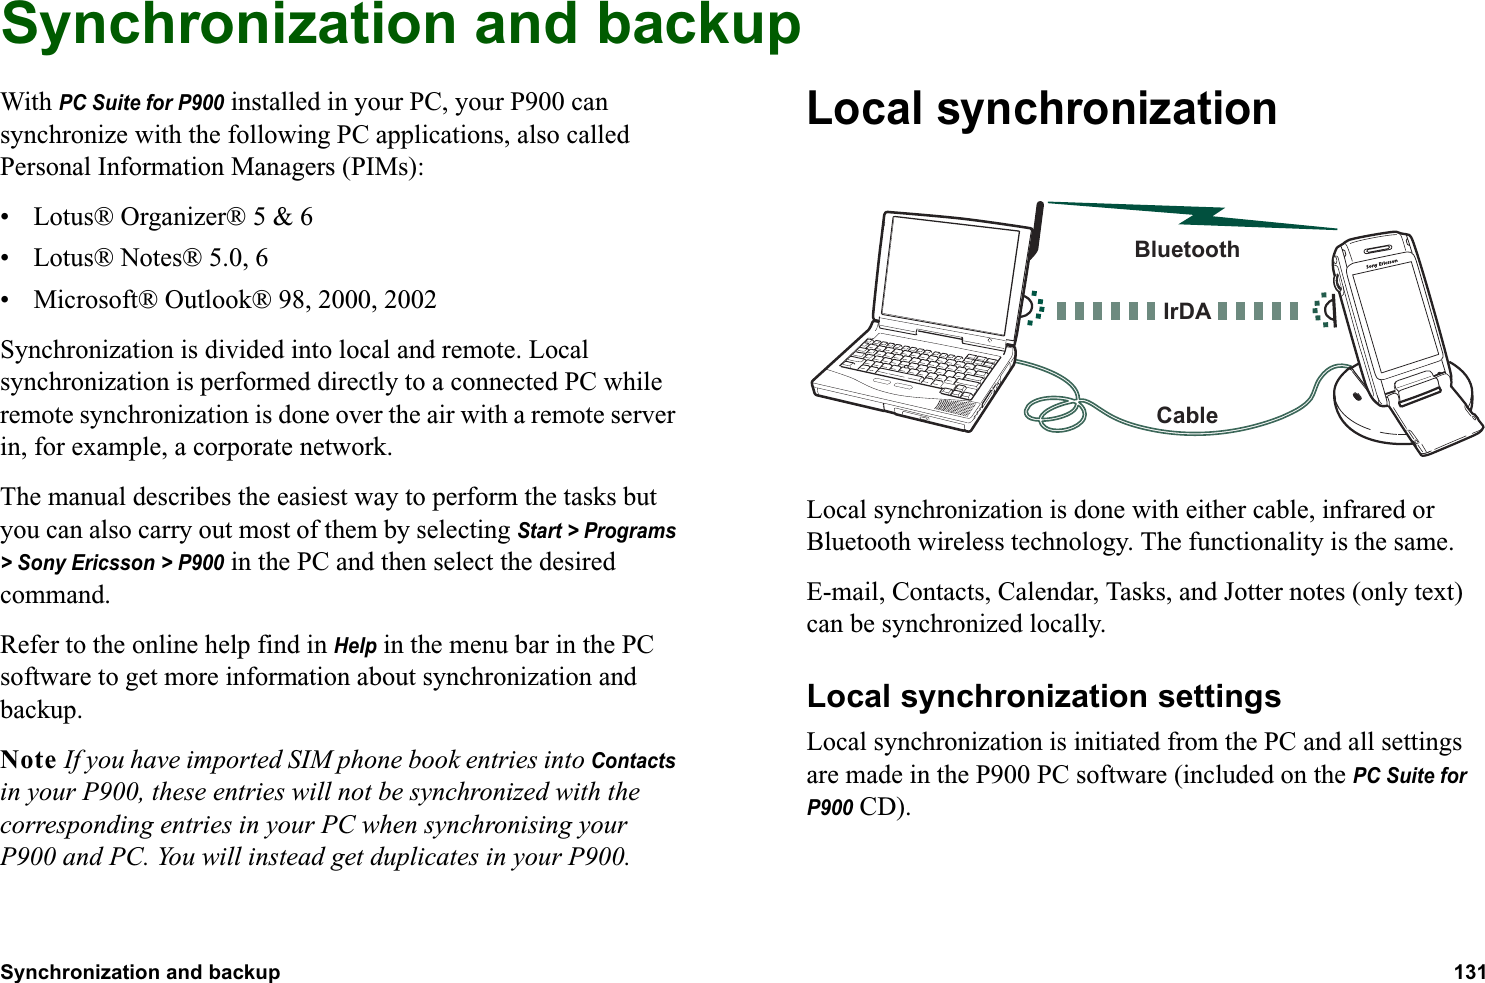 Synchronization and backup 131  Synchronization and backupWith PC Suite for P900 installed in your PC, your P900 can synchronize with the following PC applications, also called Personal Information Managers (PIMs):• Lotus® Organizer® 5 &amp; 6• Lotus® Notes® 5.0, 6• Microsoft® Outlook® 98, 2000, 2002Synchronization is divided into local and remote. Local synchronization is performed directly to a connected PC while remote synchronization is done over the air with a remote server in, for example, a corporate network.The manual describes the easiest way to perform the tasks but you can also carry out most of them by selecting Start &gt; Programs &gt; Sony Ericsson &gt; P900 in the PC and then select the desired command.Refer to the online help find in Help in the menu bar in the PC software to get more information about synchronization and backup.Note If you have imported SIM phone book entries into Contacts in your P900, these entries will not be synchronized with the corresponding entries in your PC when synchronising your P900 and PC. You will instead get duplicates in your P900.Local synchronizationLocal synchronization is done with either cable, infrared or Bluetooth wireless technology. The functionality is the same.E-mail, Contacts, Calendar, Tasks, and Jotter notes (only text) can be synchronized locally.Local synchronization settingsLocal synchronization is initiated from the PC and all settings are made in the P900 PC software (included on the PC Suite for P900 CD).BluetoothCableIrDA